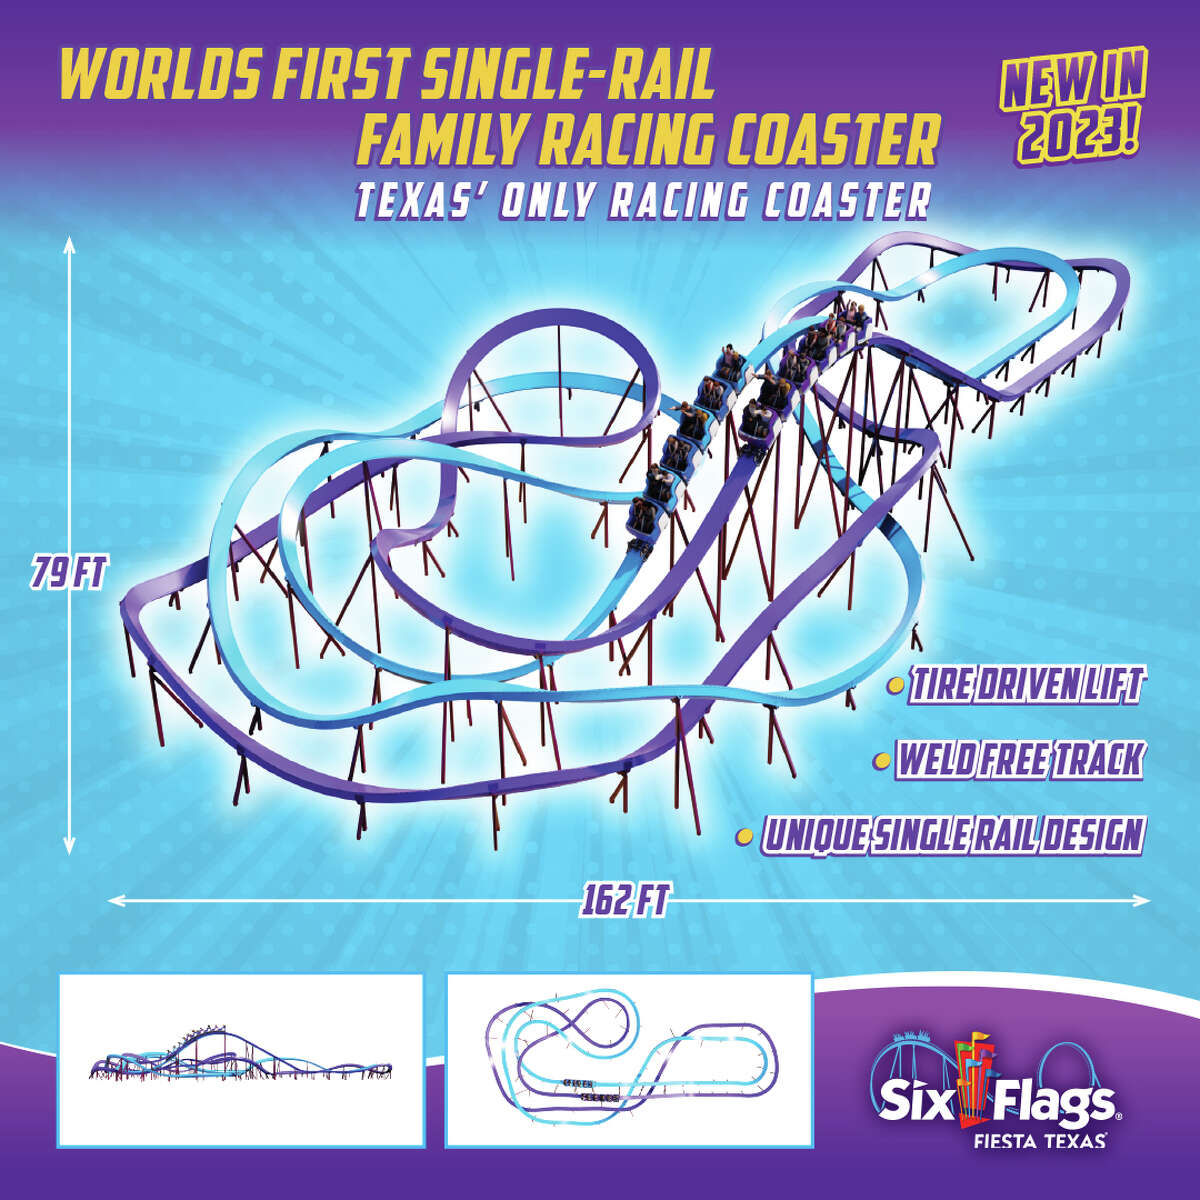 Six Flags Fiesta Texas will be adding a family racing coaster in 2023.